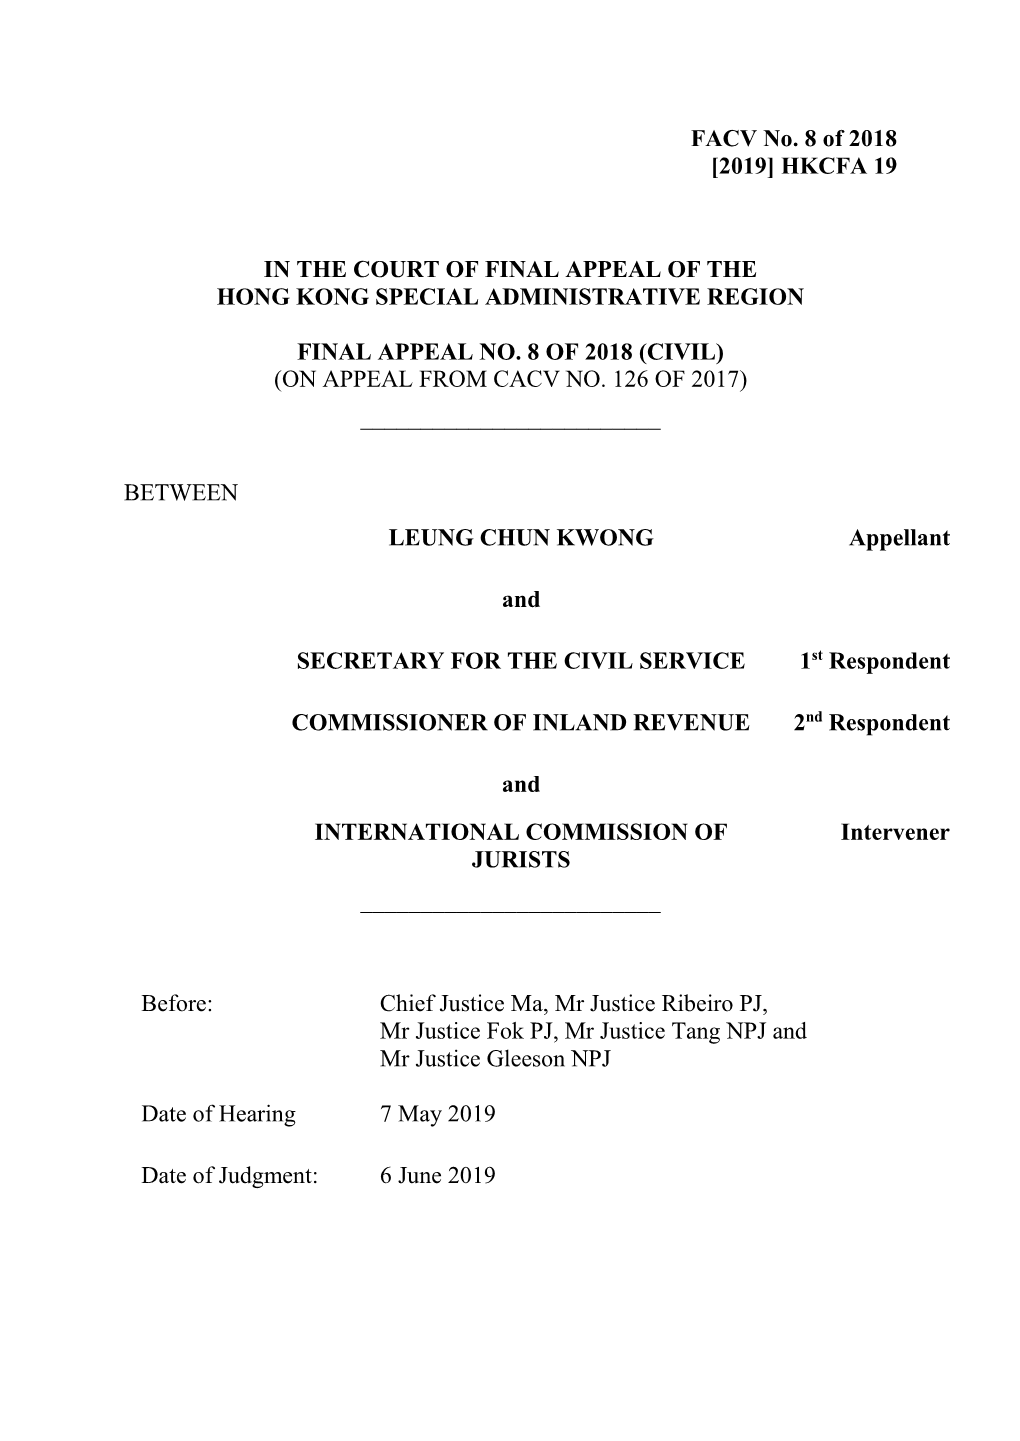 FACV No. 8 of 2018 [2019] HKCFA 19 in the COURT of FINAL APPEAL